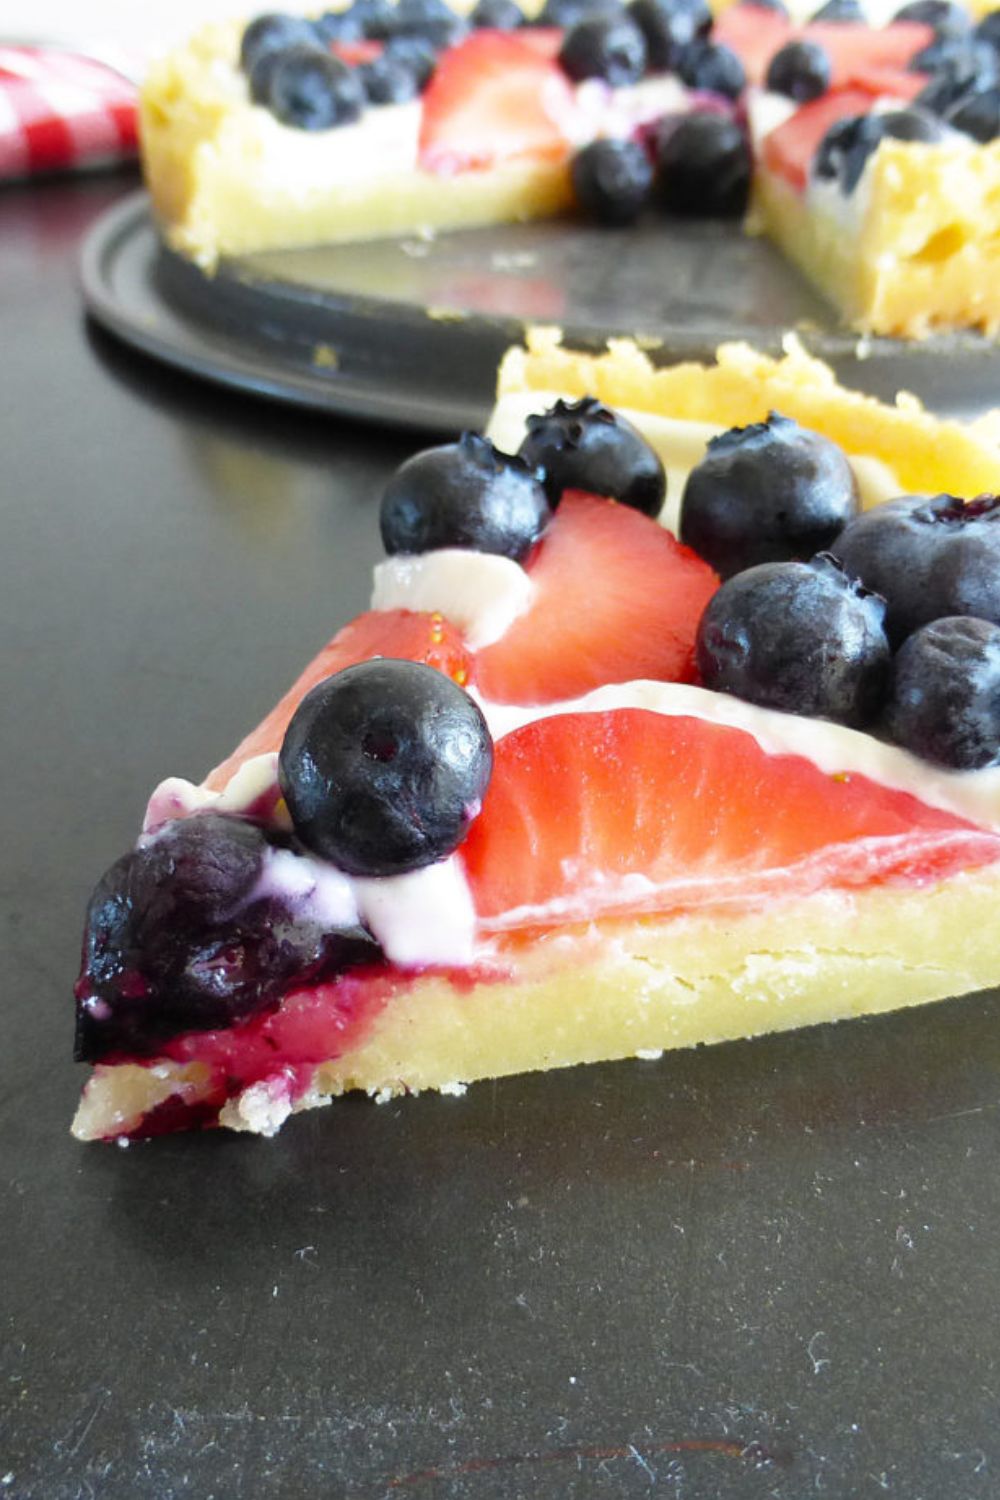 Lemon Cookie Pizza with Strawberries & Blueberries